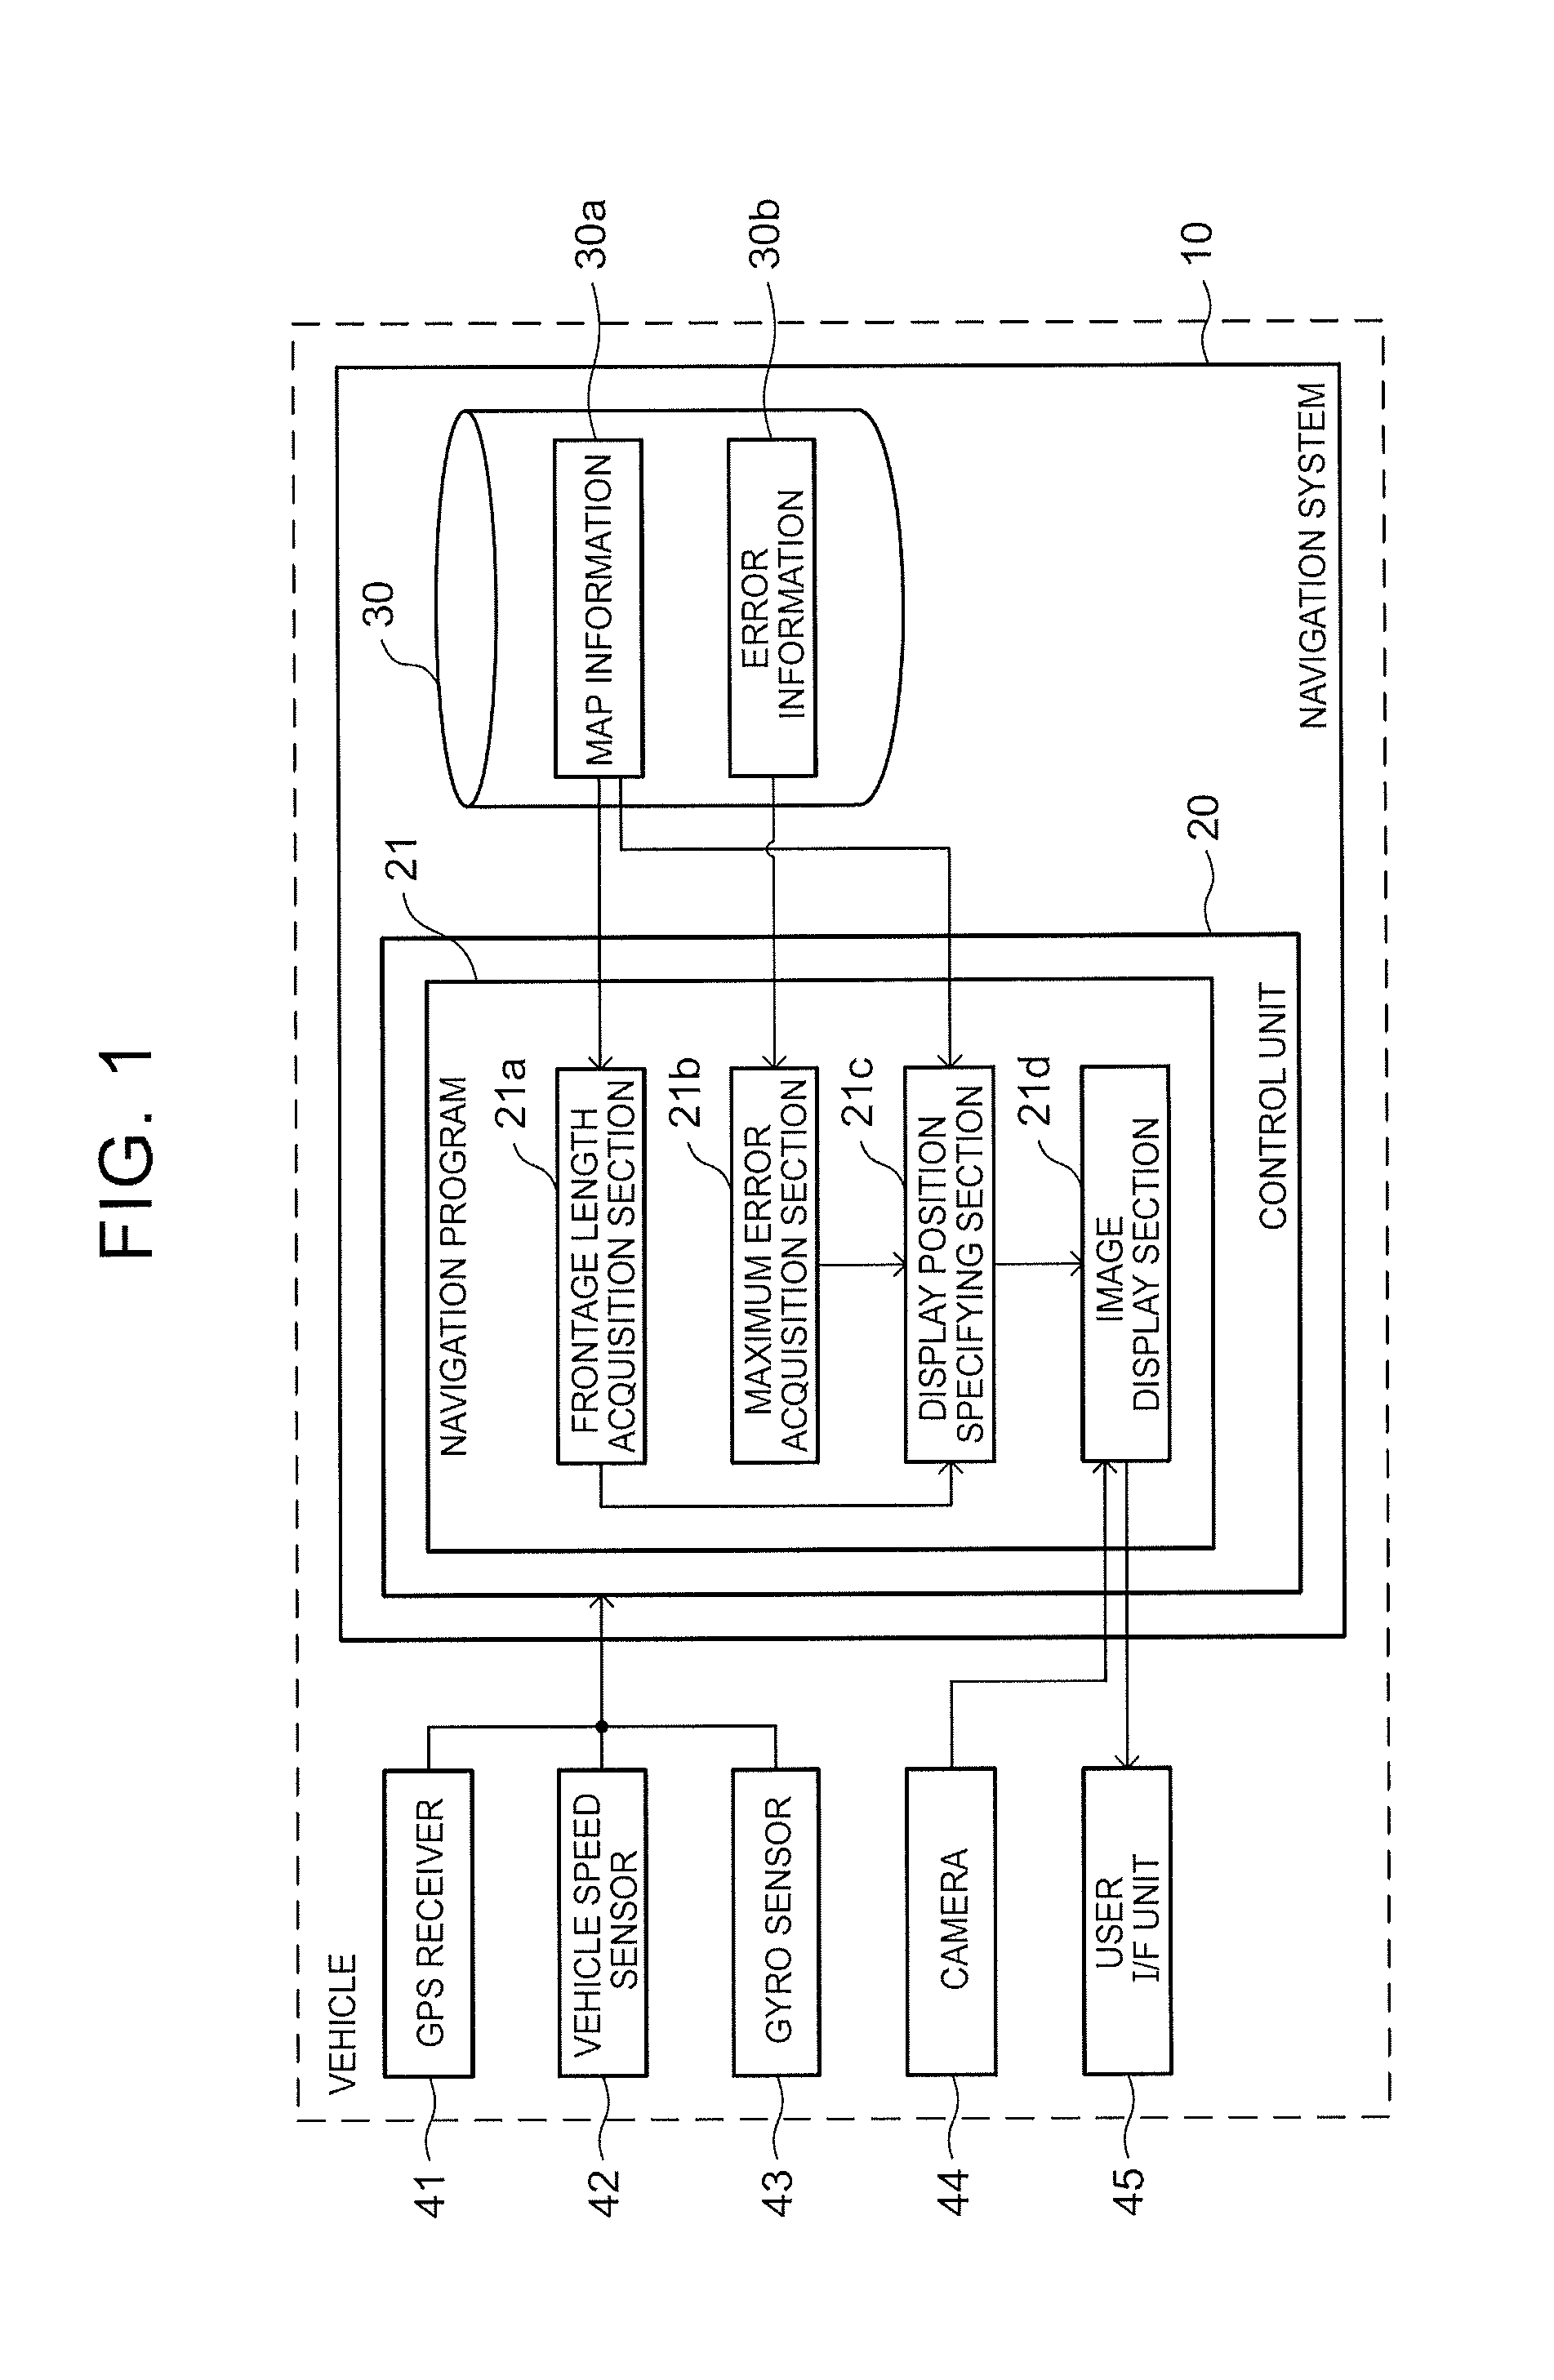 Drive assist system, method, and program